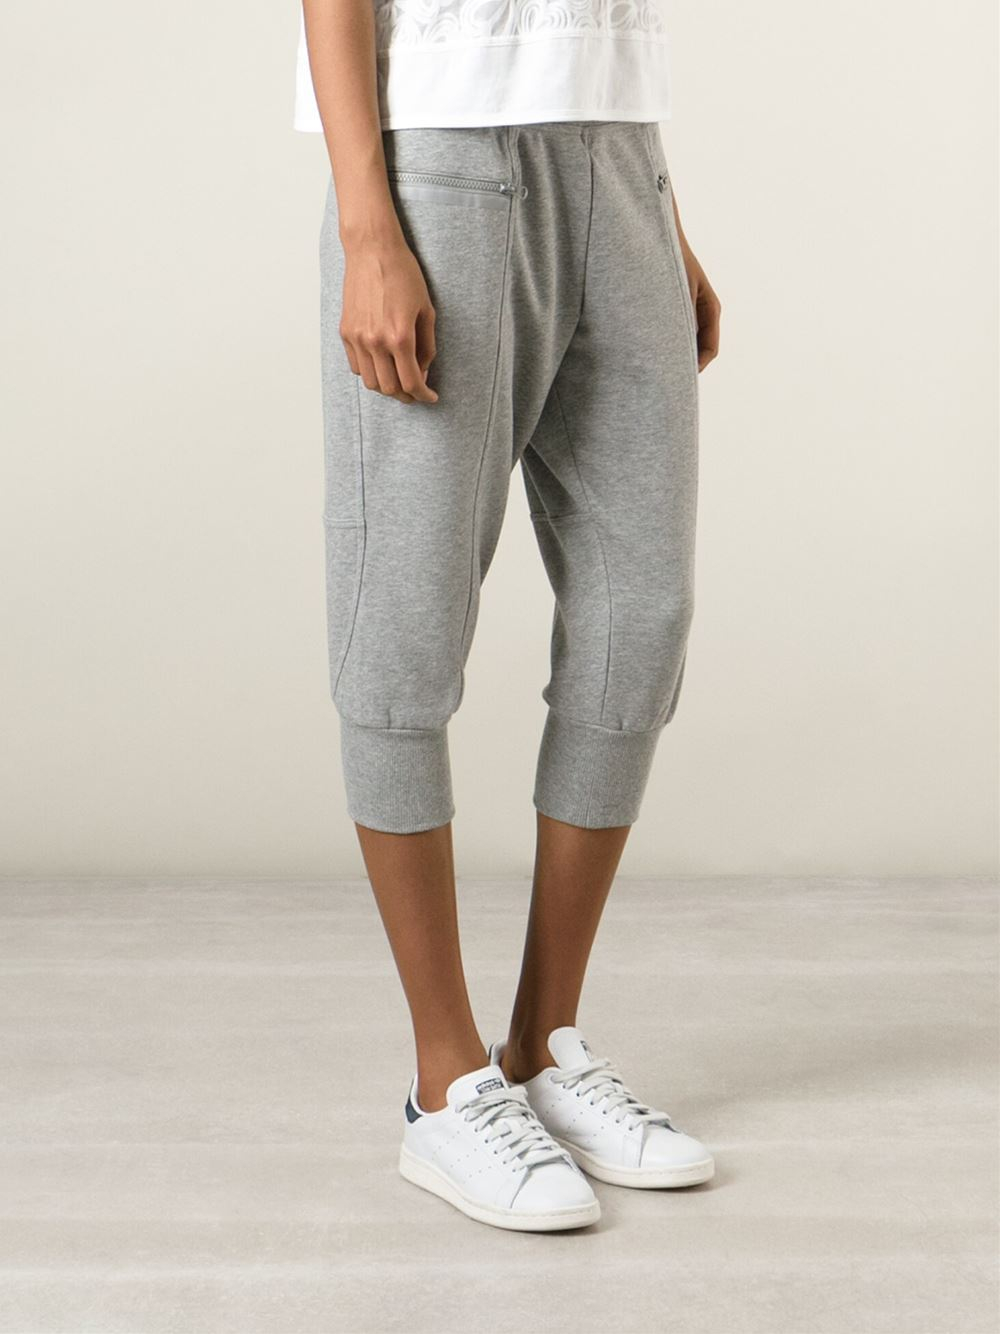 Adidas by stella mccartney Cropped Track Pants in Gray (grey) | Lyst